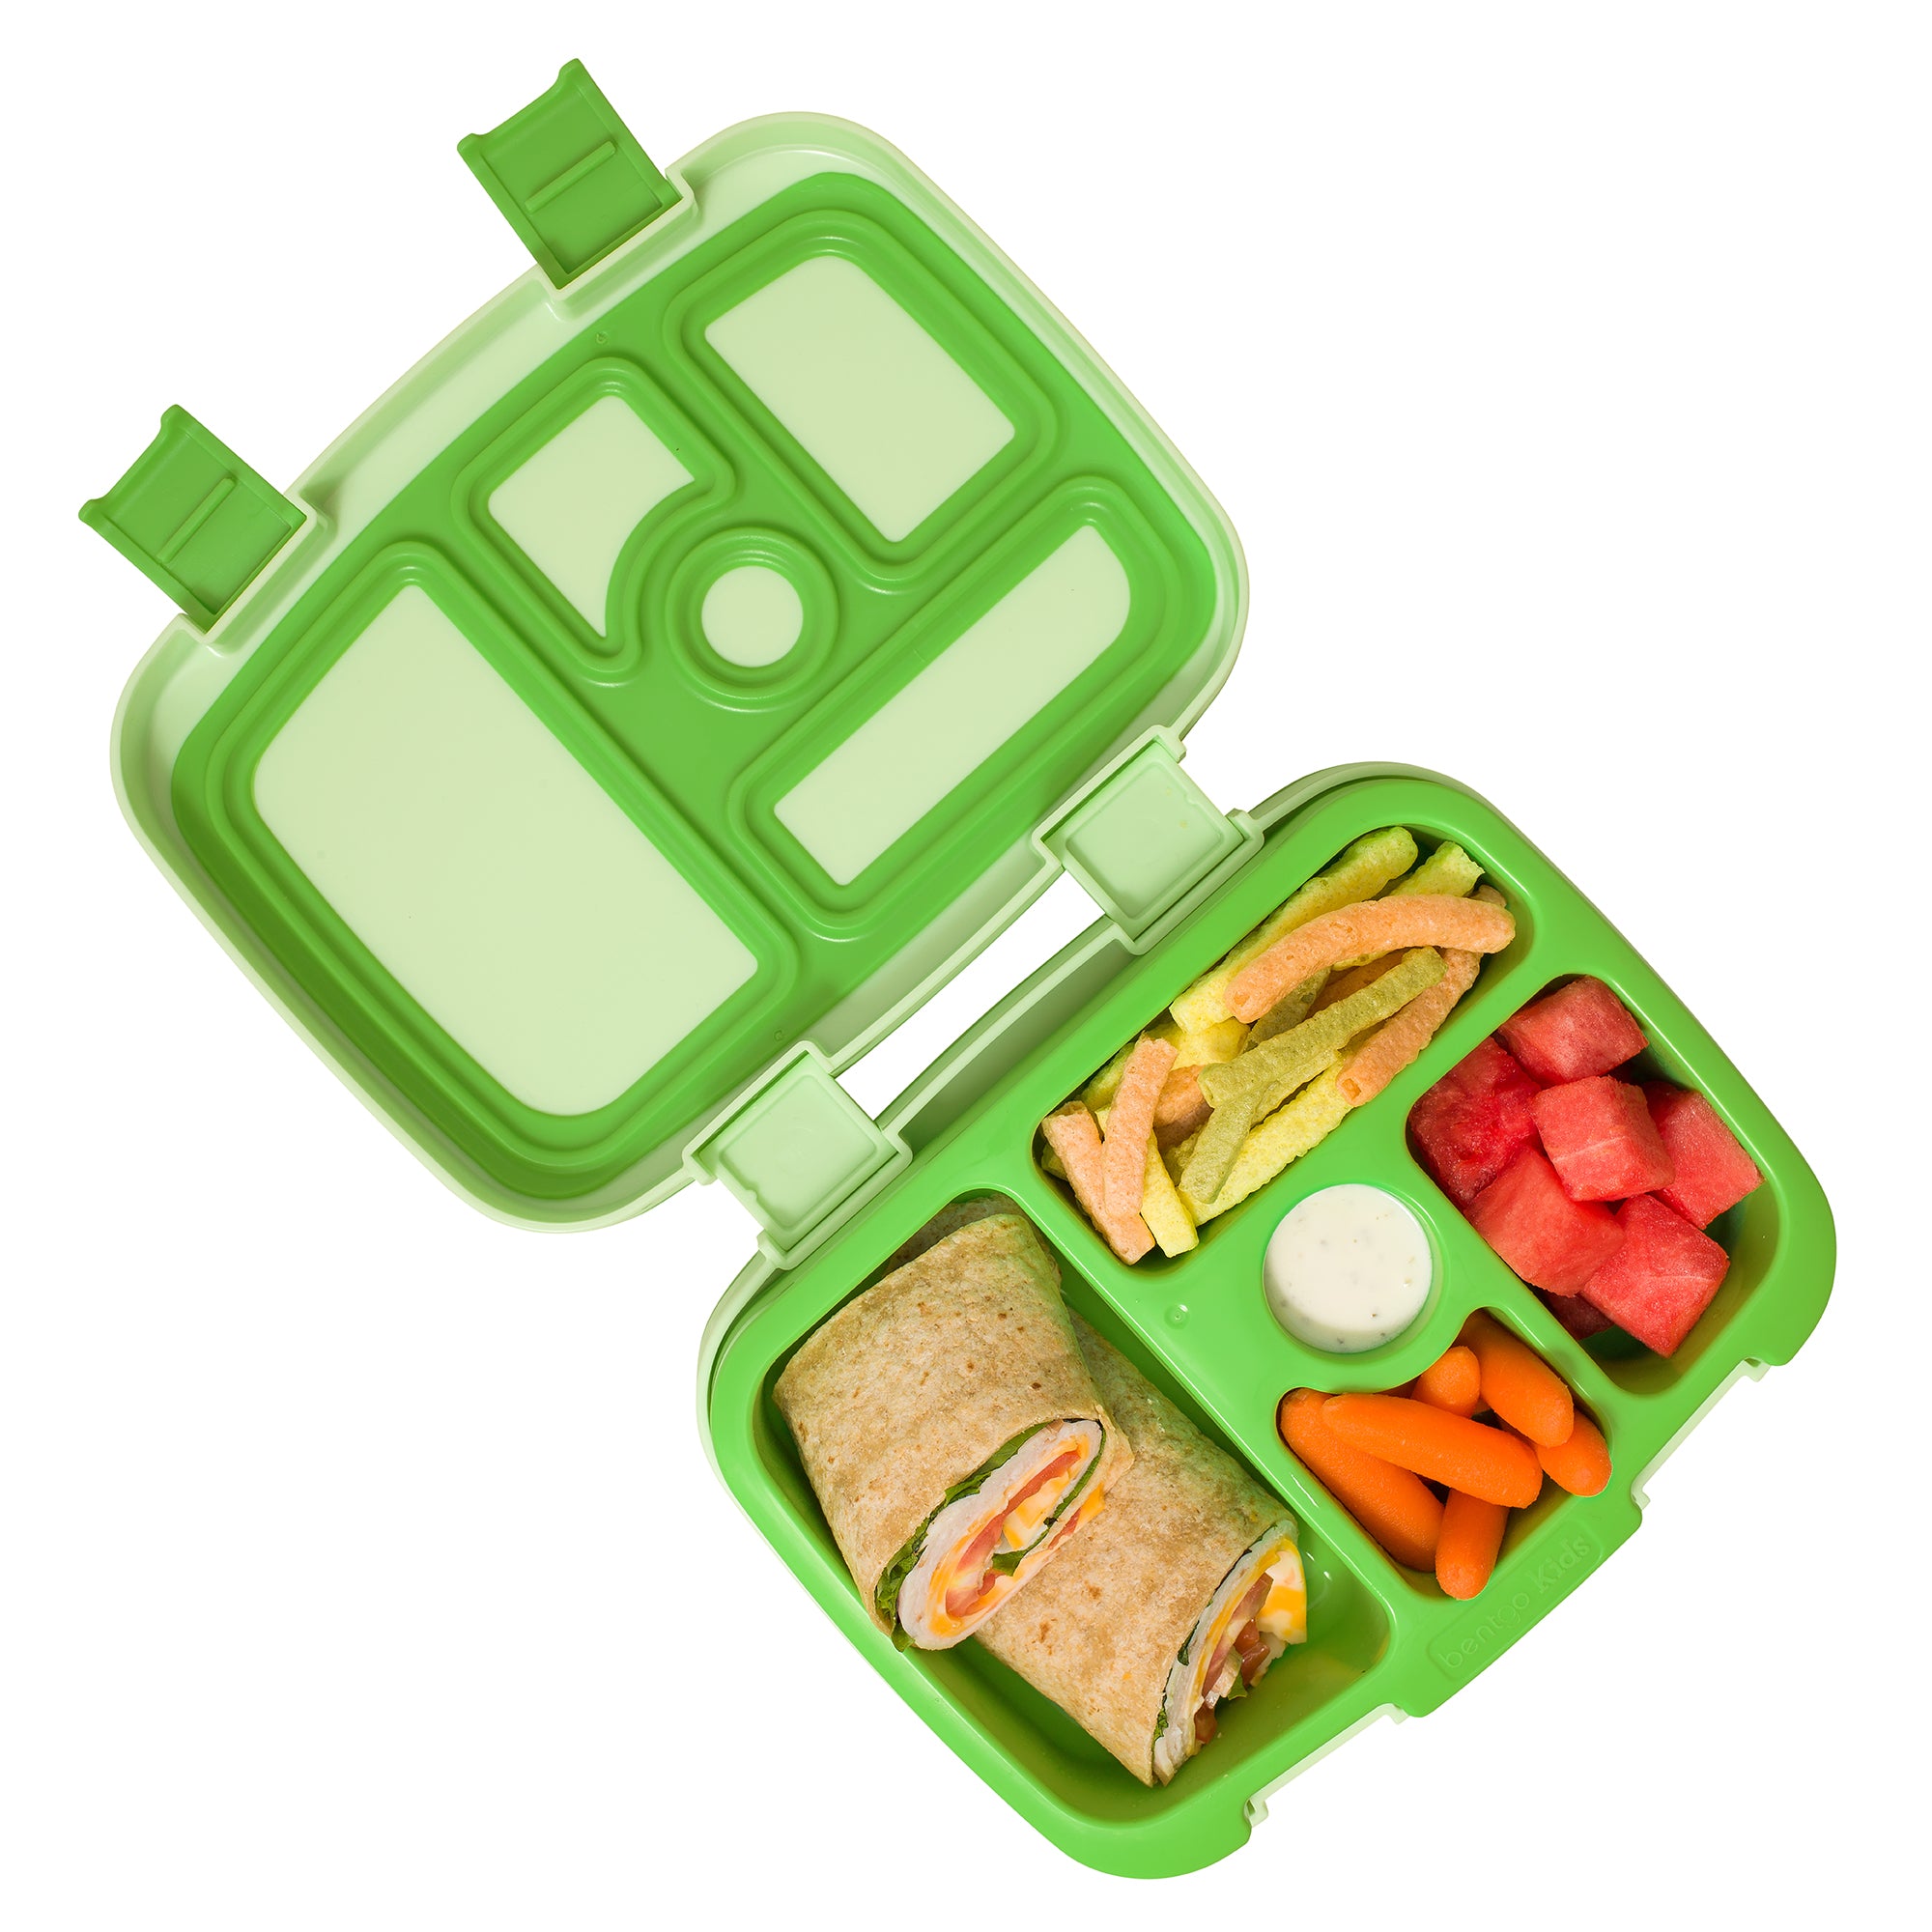 Bentgo® Lunch Accessories For Kids